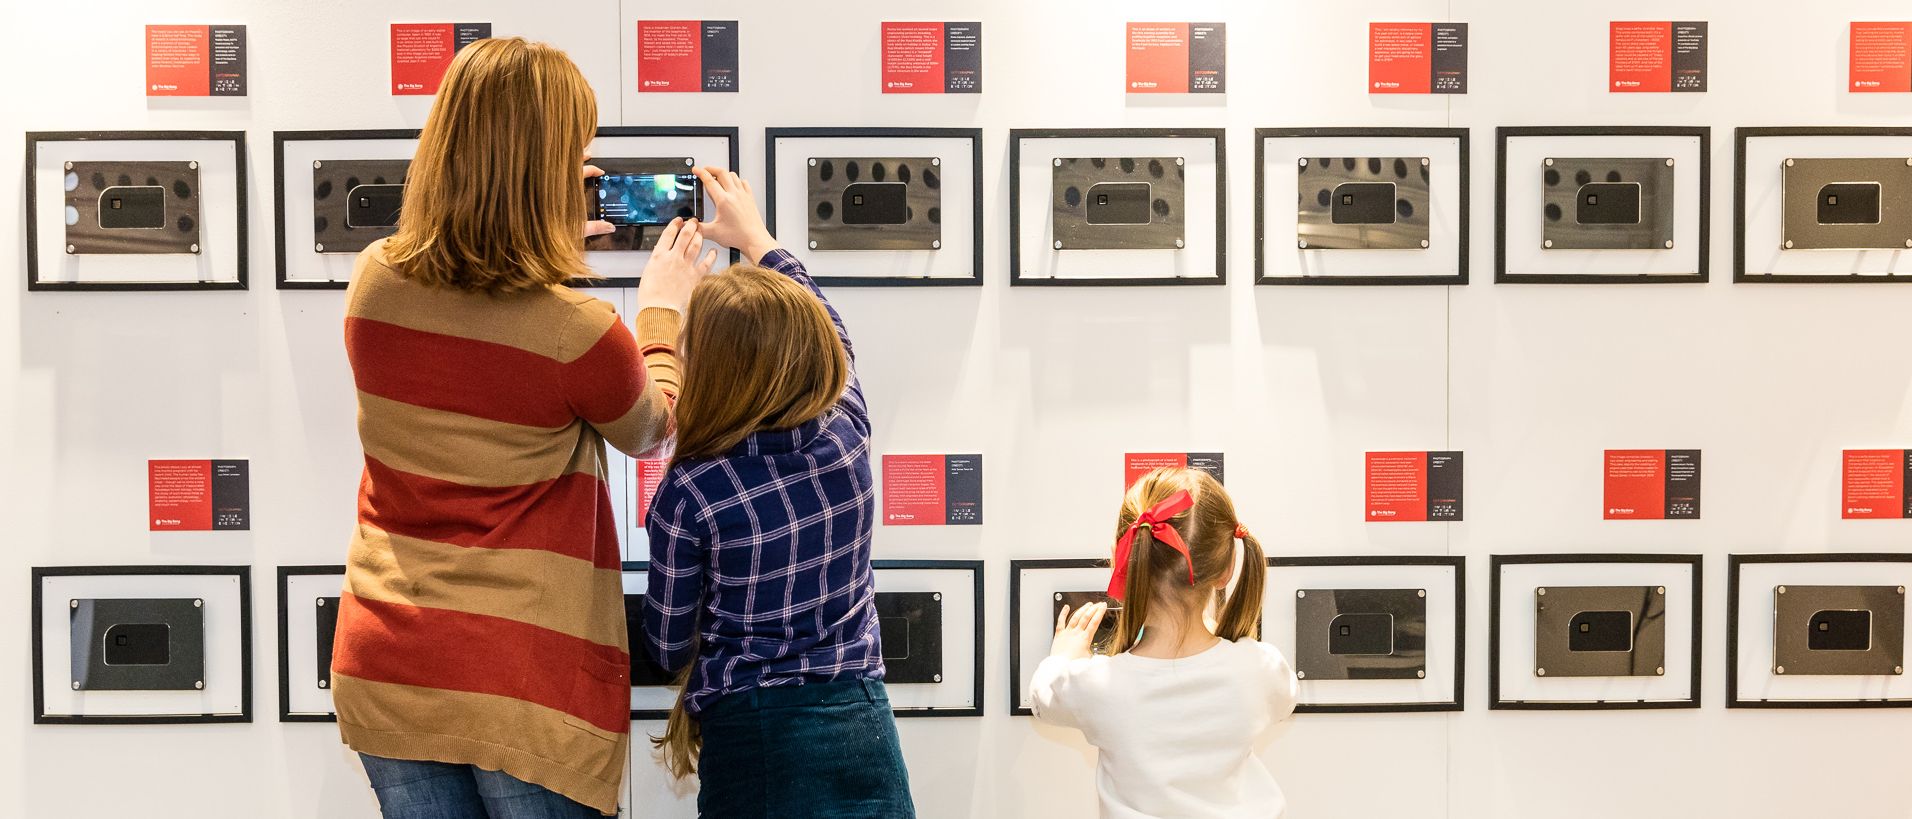 Visitors attend world’s first “invisible” photography exhibition - featuring images so small that they require a microscope to be seen. Entitled “Dotography”, the exhibition was organised by The Big Bang Fair 2018 to raise awareness of the largest celebration of STEM for young people in the UK. The collection includes famous images of scientific importance and original photos submitted by celebrities, the STEM community and local school children. Dotography runs until 28th January at the Birmingham Bullring Link Street, Unit K2.